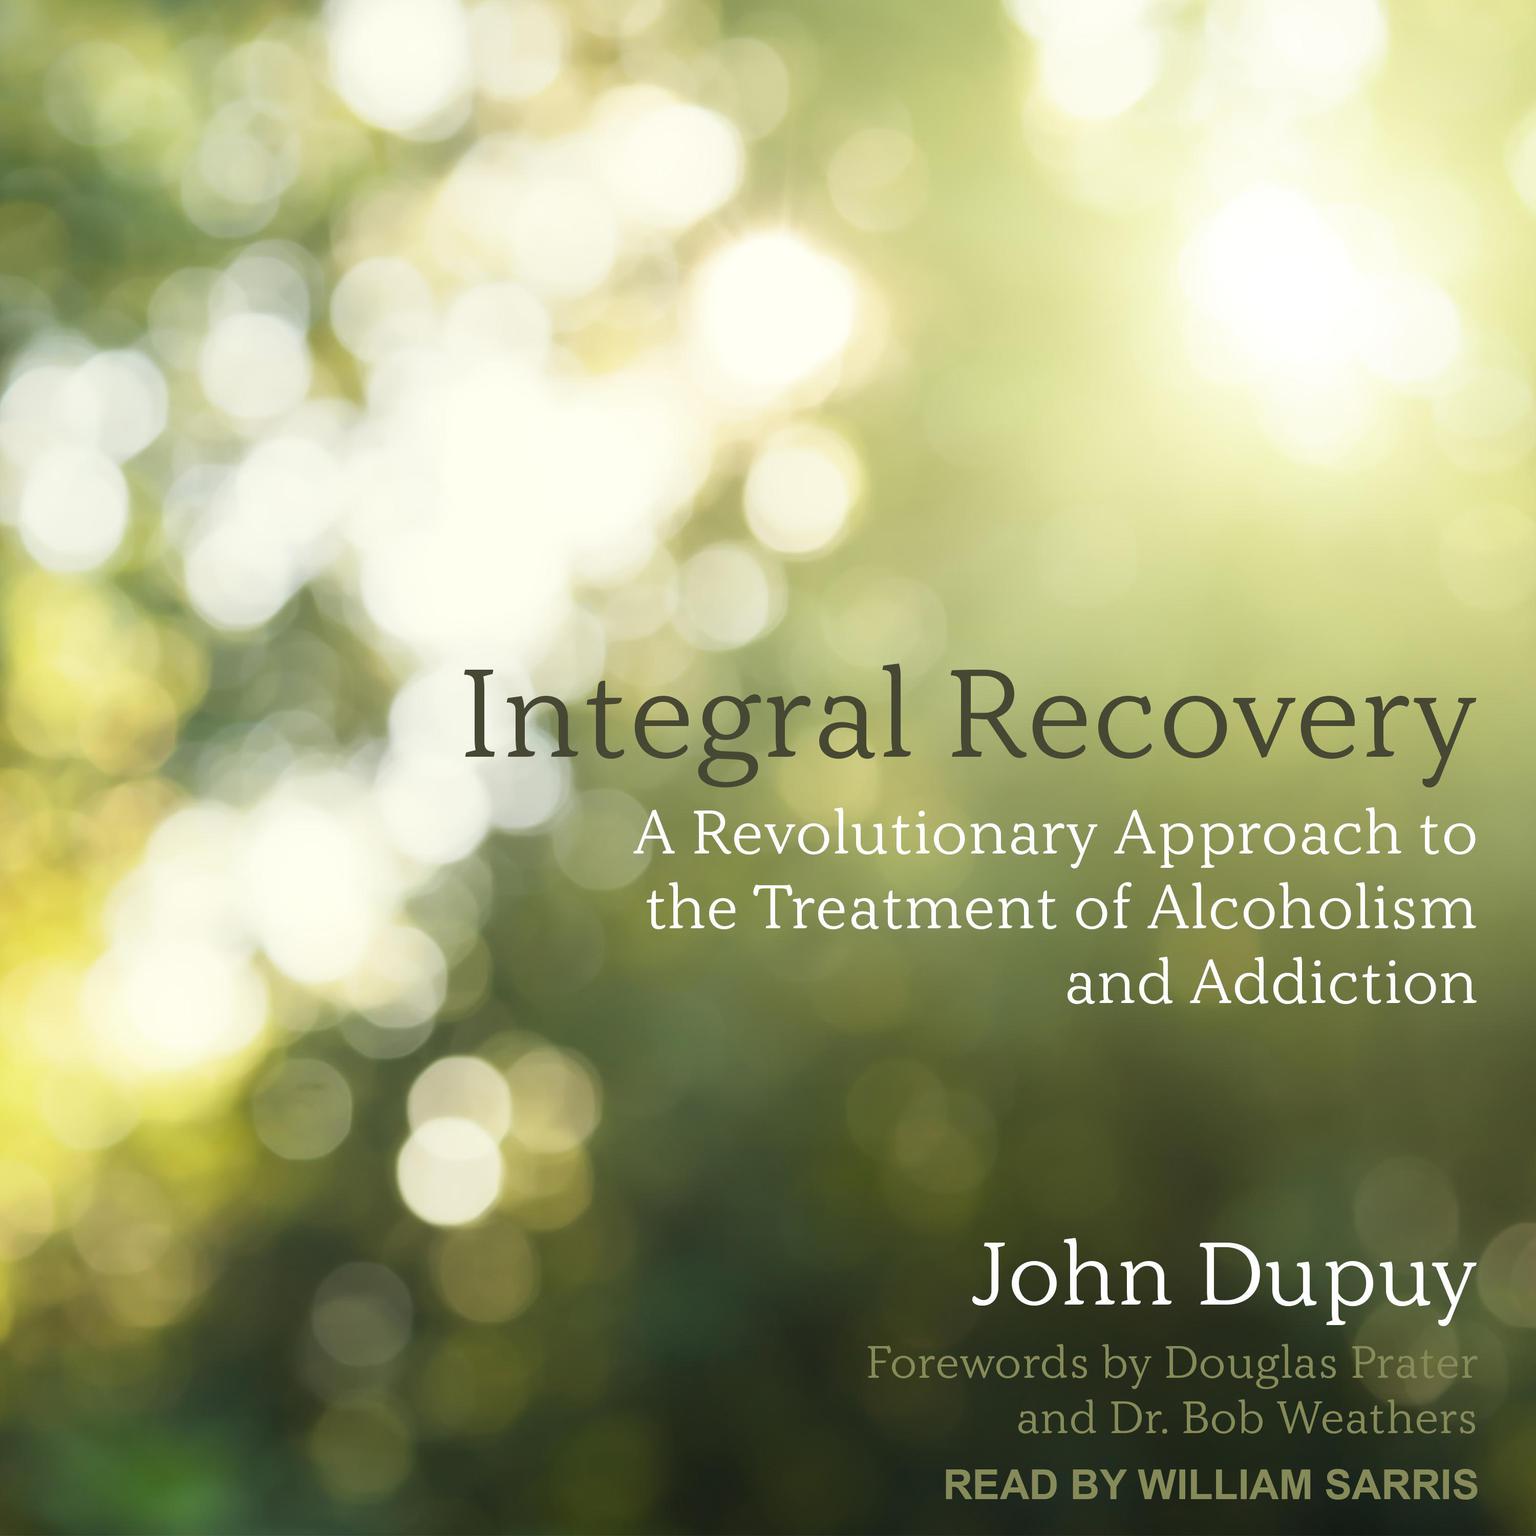 Integral Recovery: A Revolutionary Approach to the Treatment of Alcoholism and Addiction Audiobook, by John Dupuy